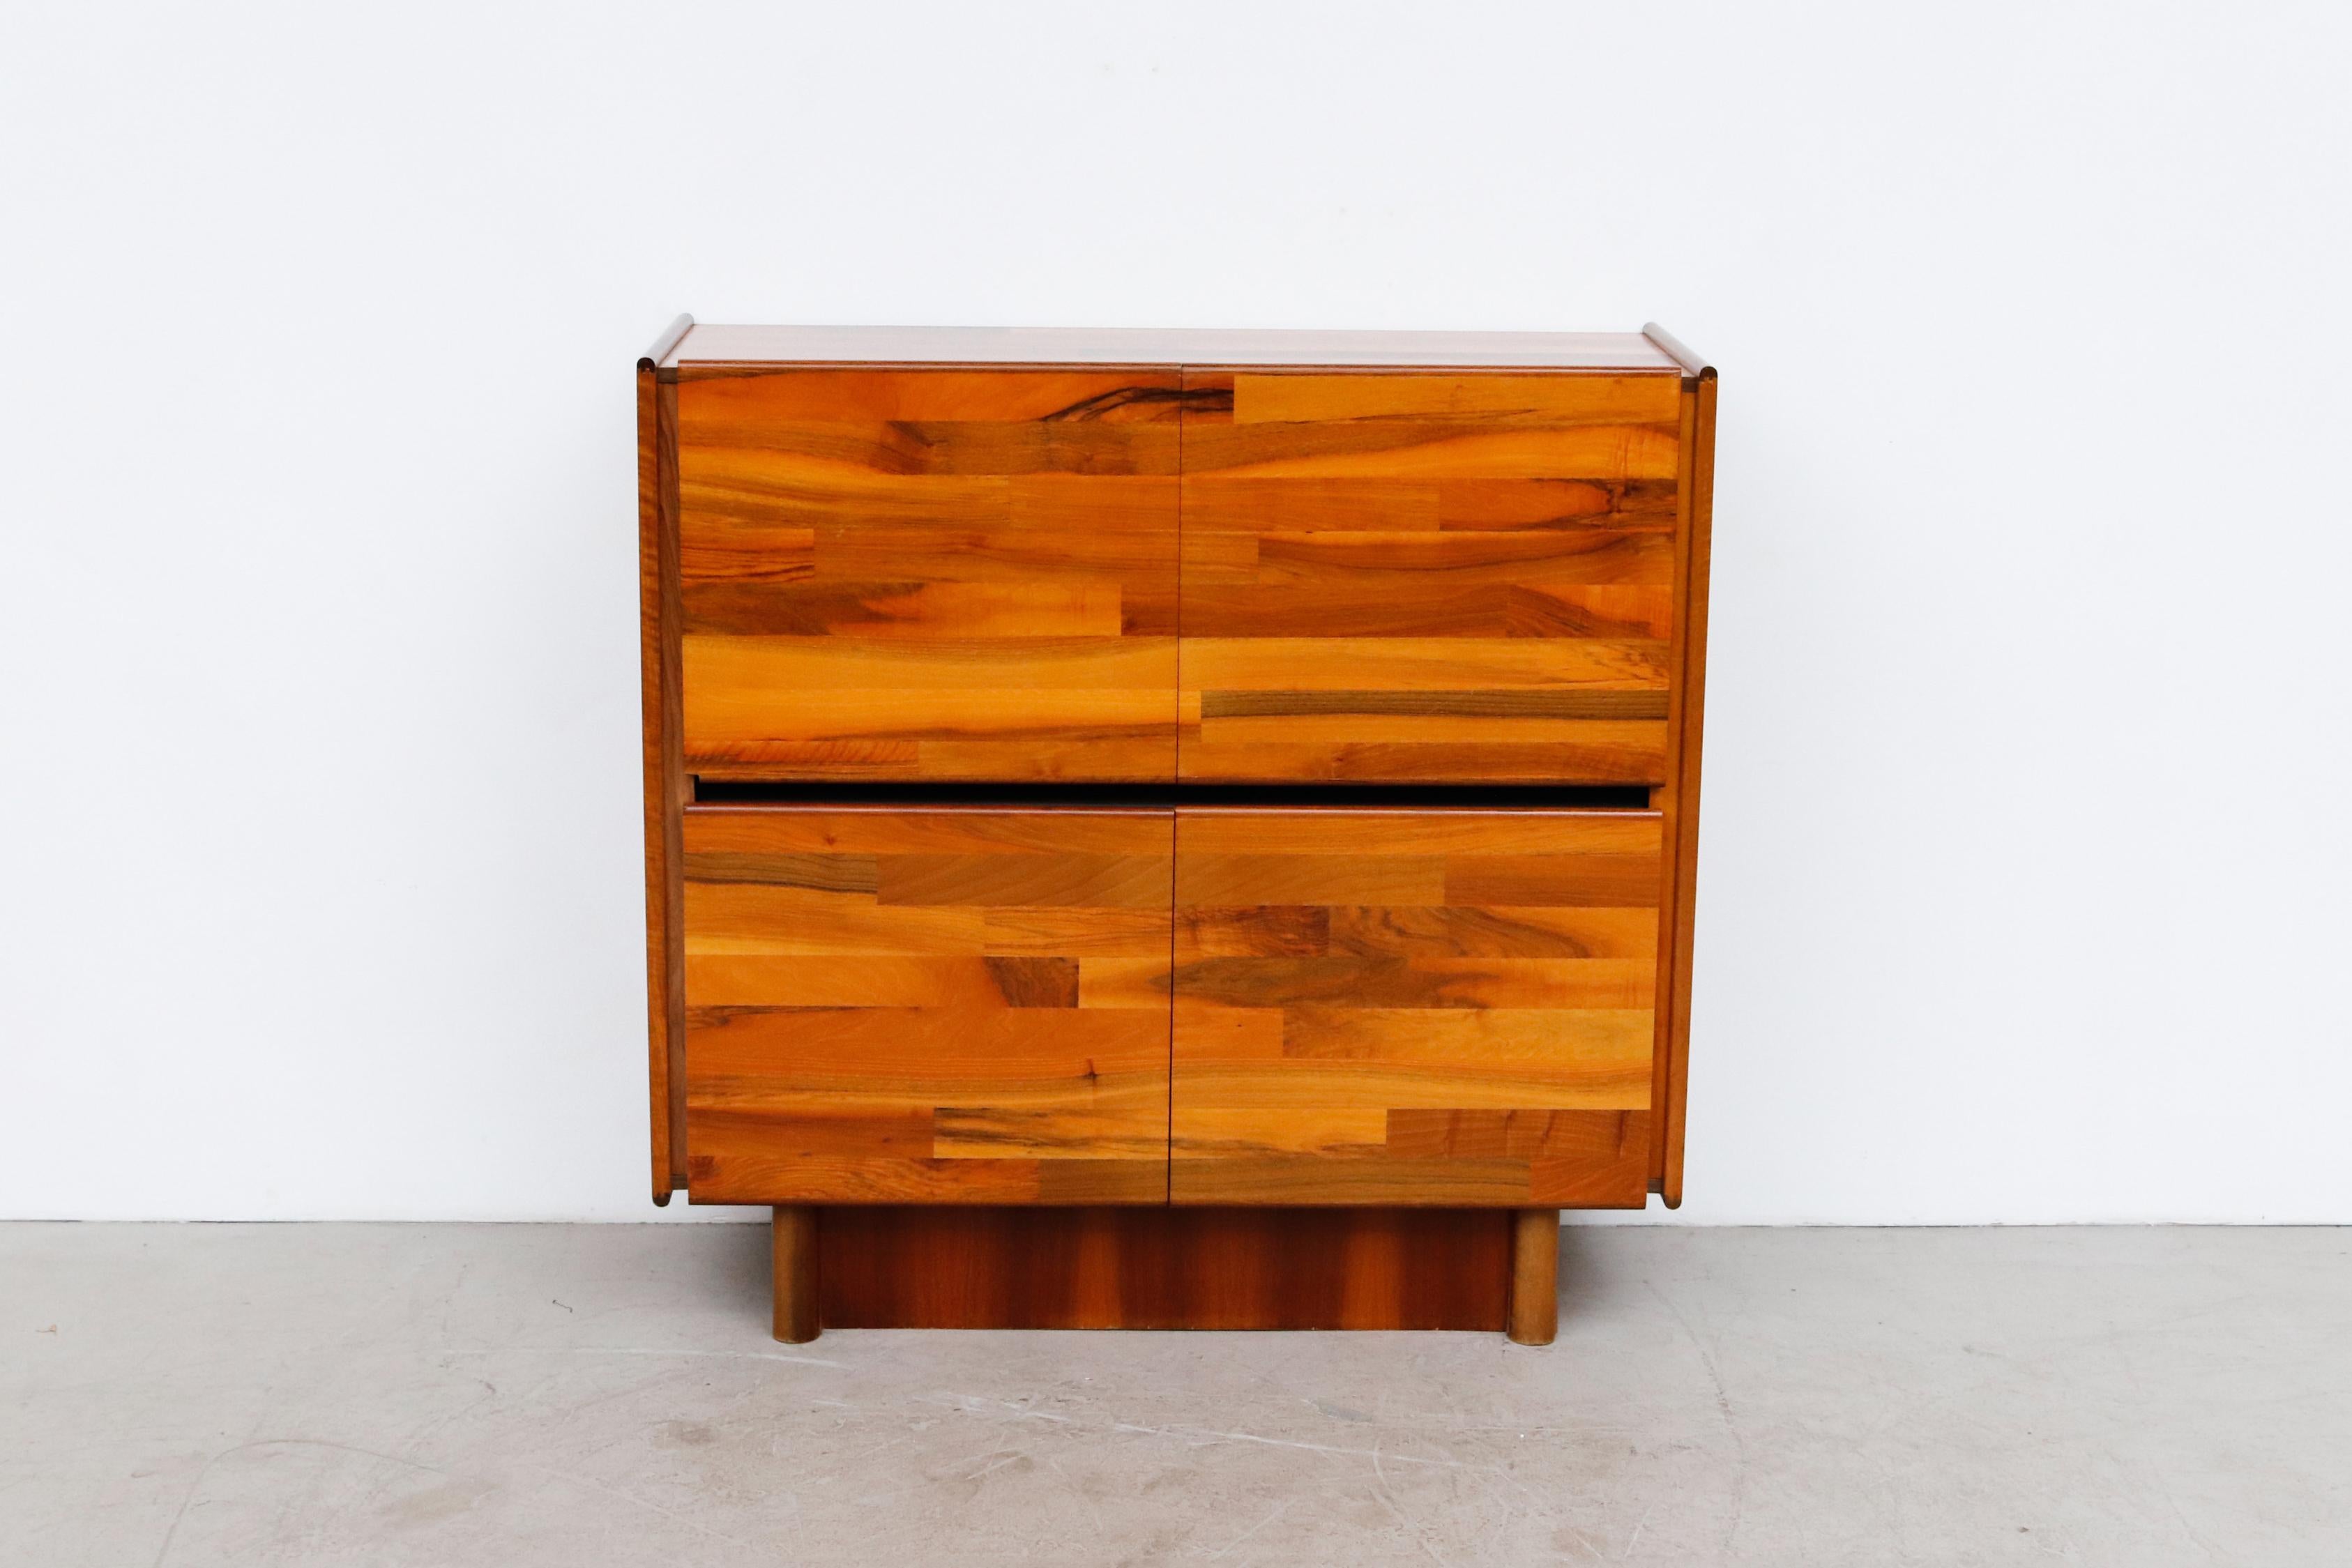 Jorge Zalszupin style patchwork dry bar or cabinet with gloss finish. One drop down bar door and side cabinet with lower double door storage. In original condition with some scratching and wear consistent with its age and use. Larger matching